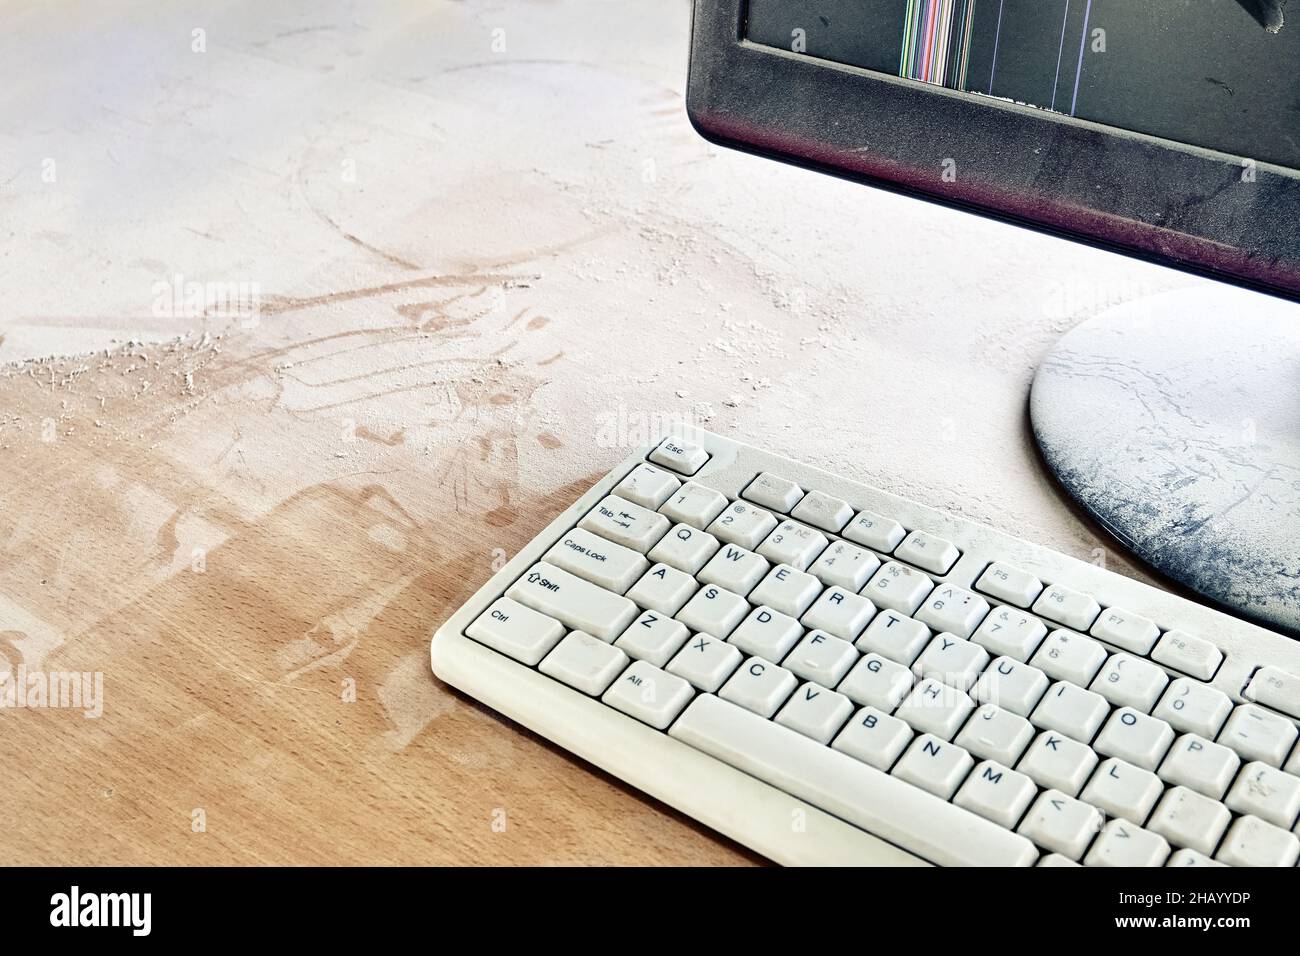 Old keyboard and broken monitor are on wooden table and covered in thick dust in a workshop closeup Stock Photo